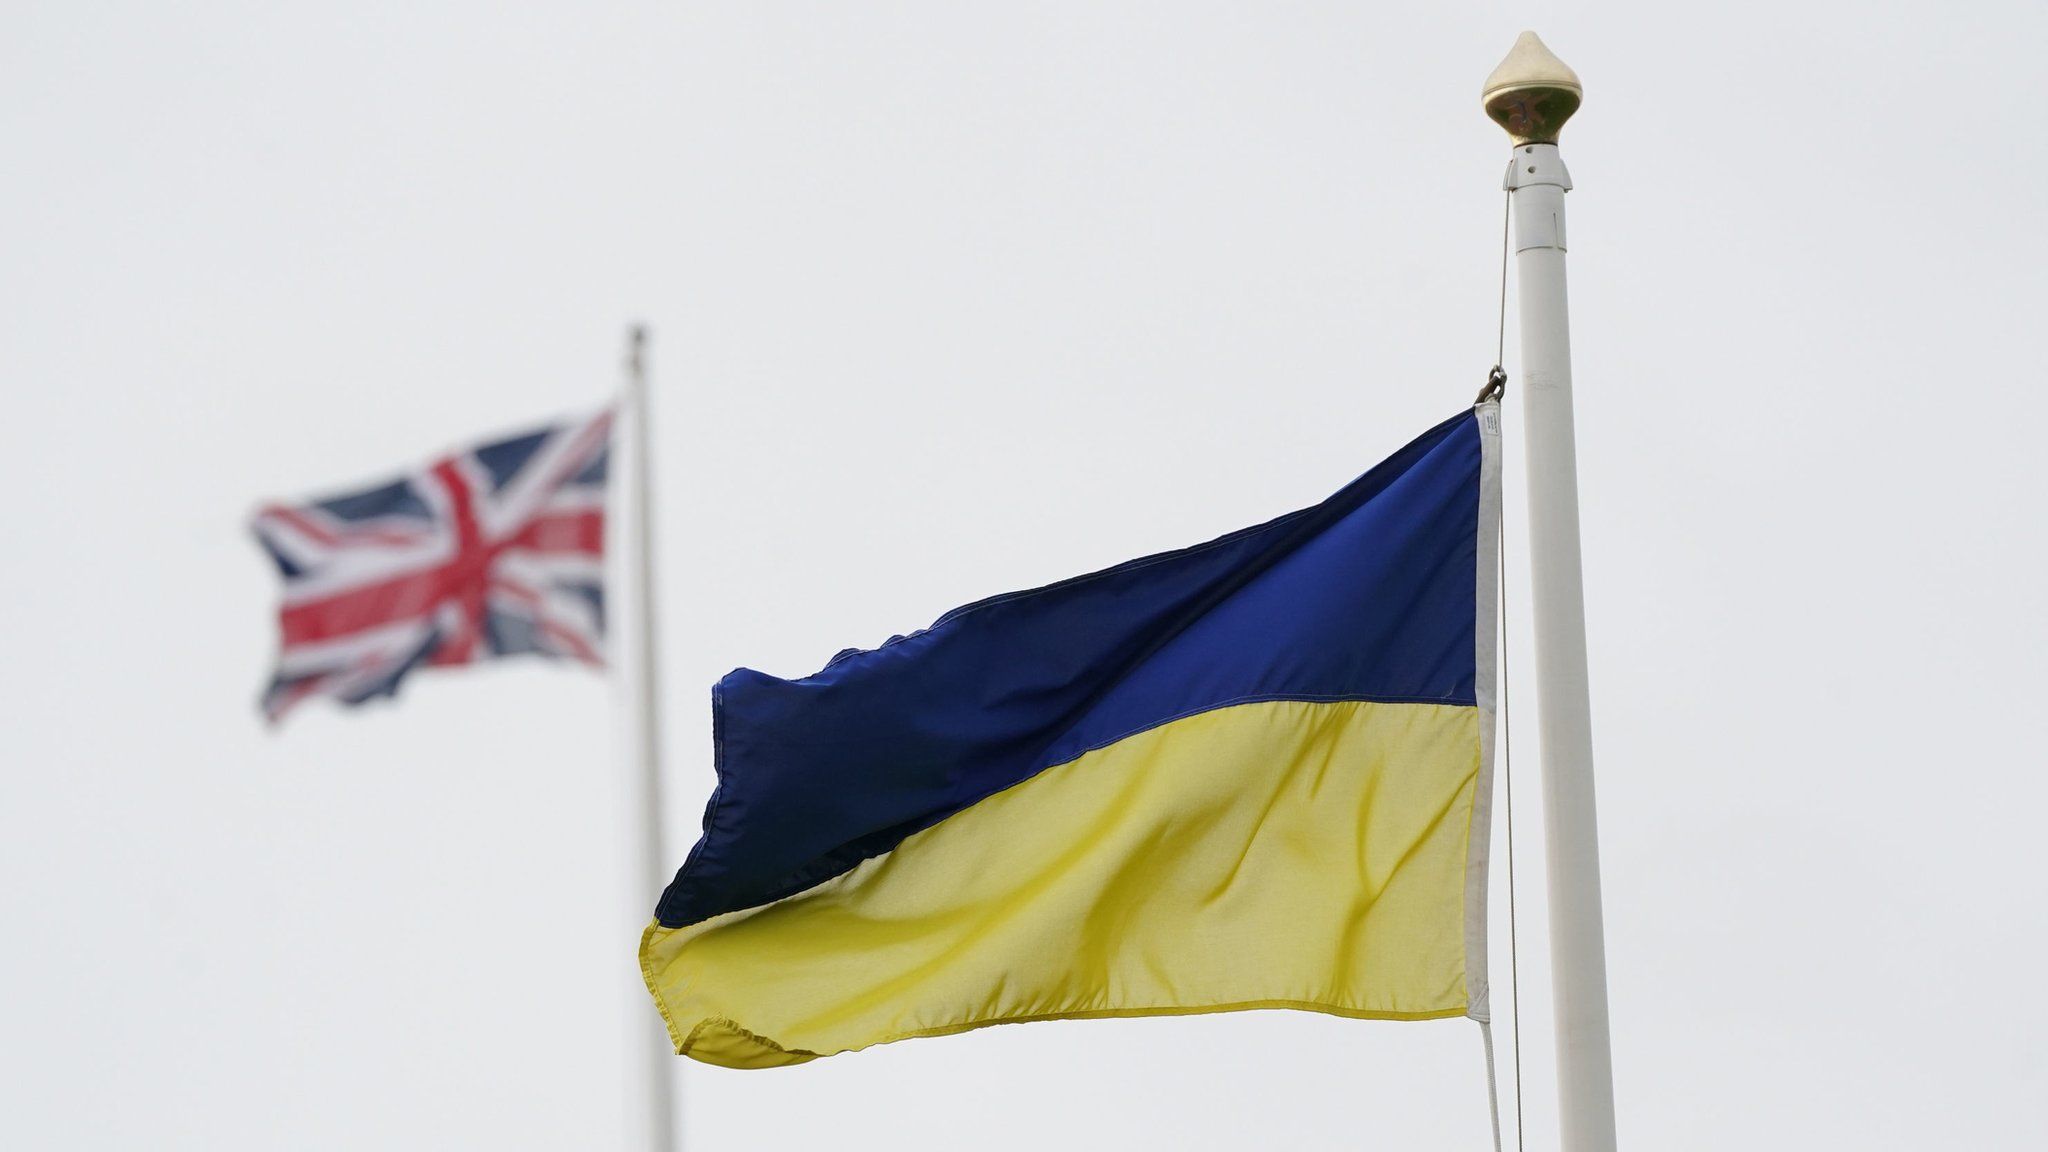 UK and Ukraine flags fly alongside one another